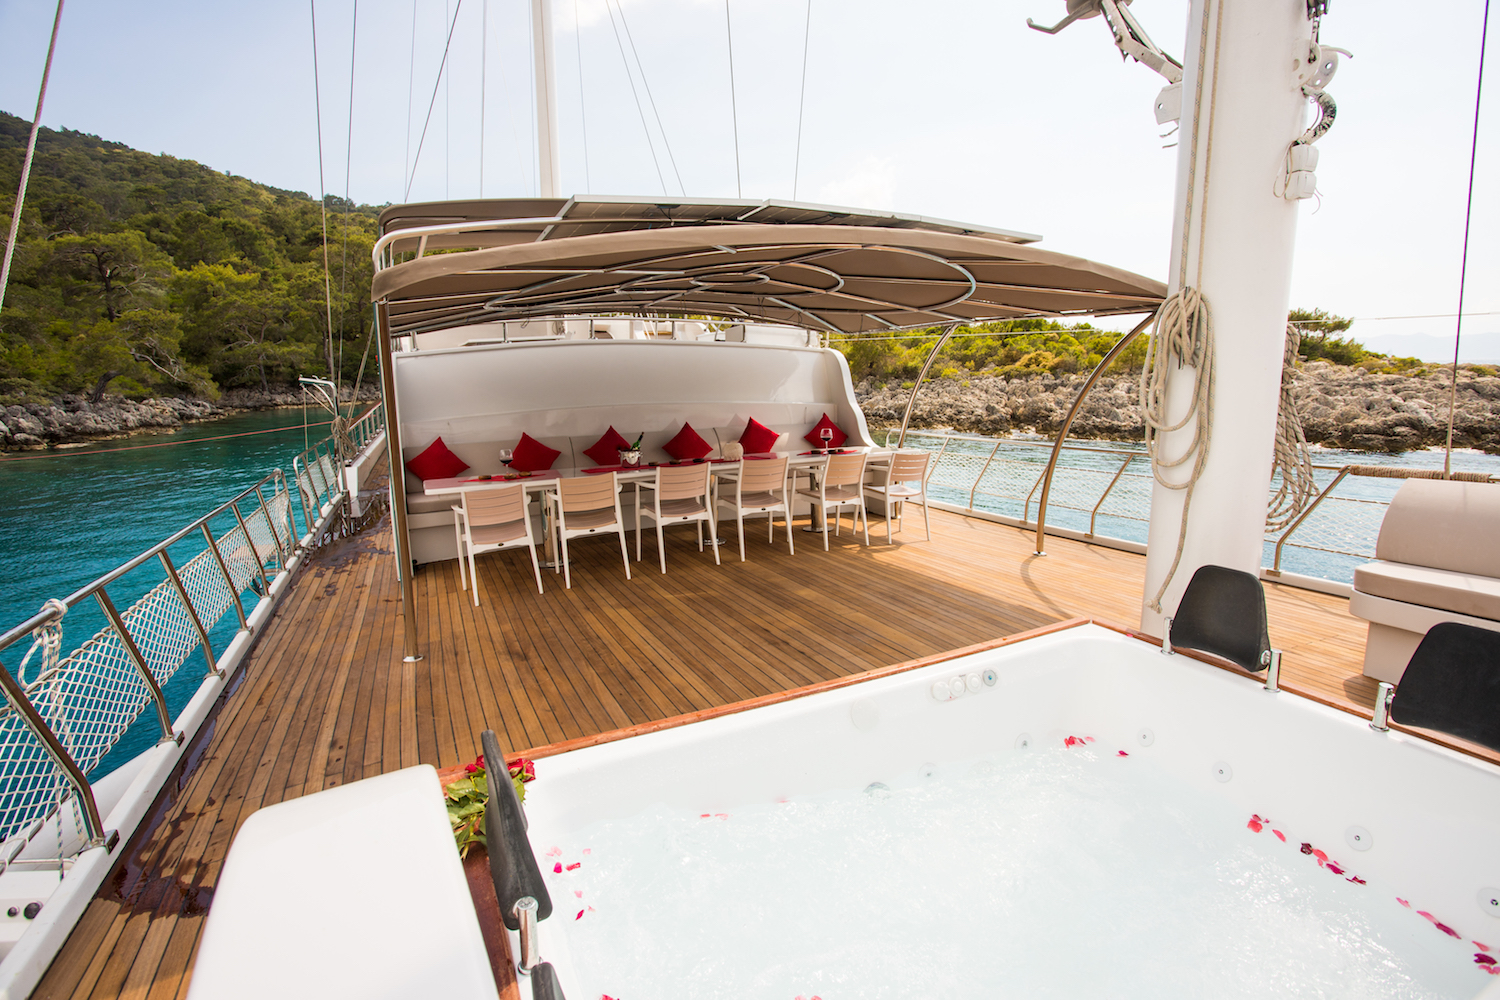 Jacuzzi And Alfresco Dining On Deck